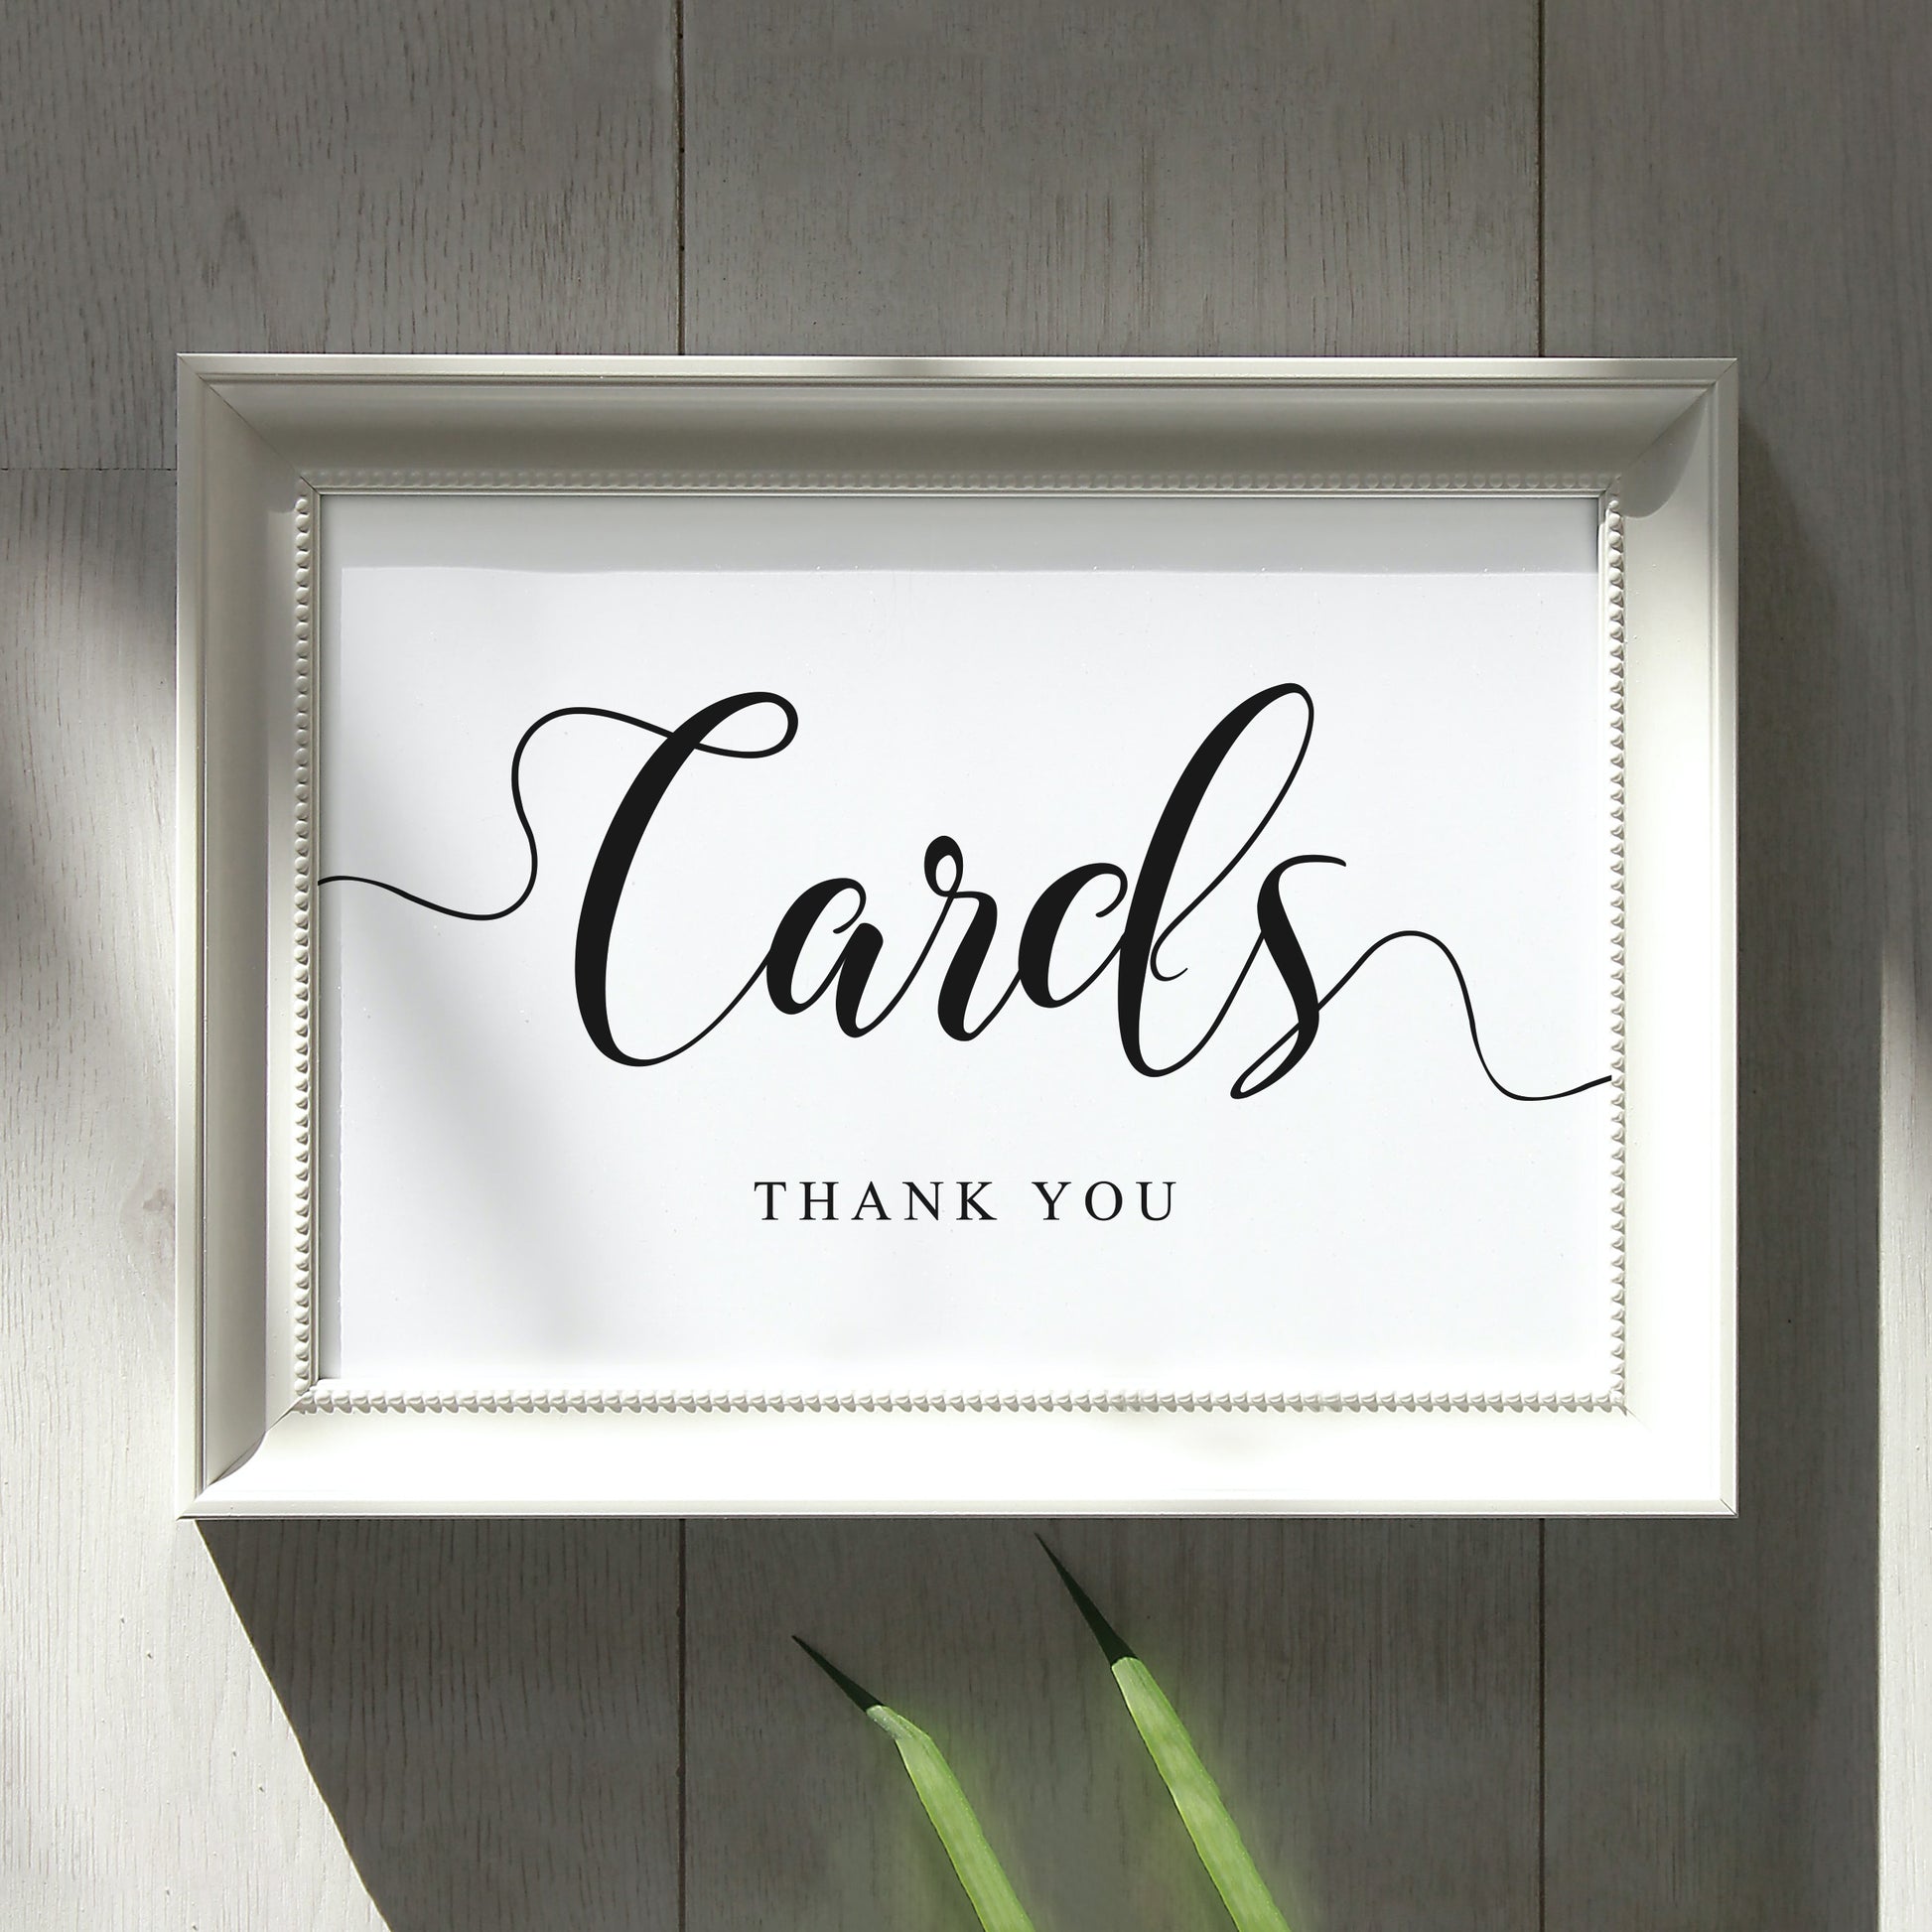 Elegant wedding cards sign, printed in white picture frame on rustic wall